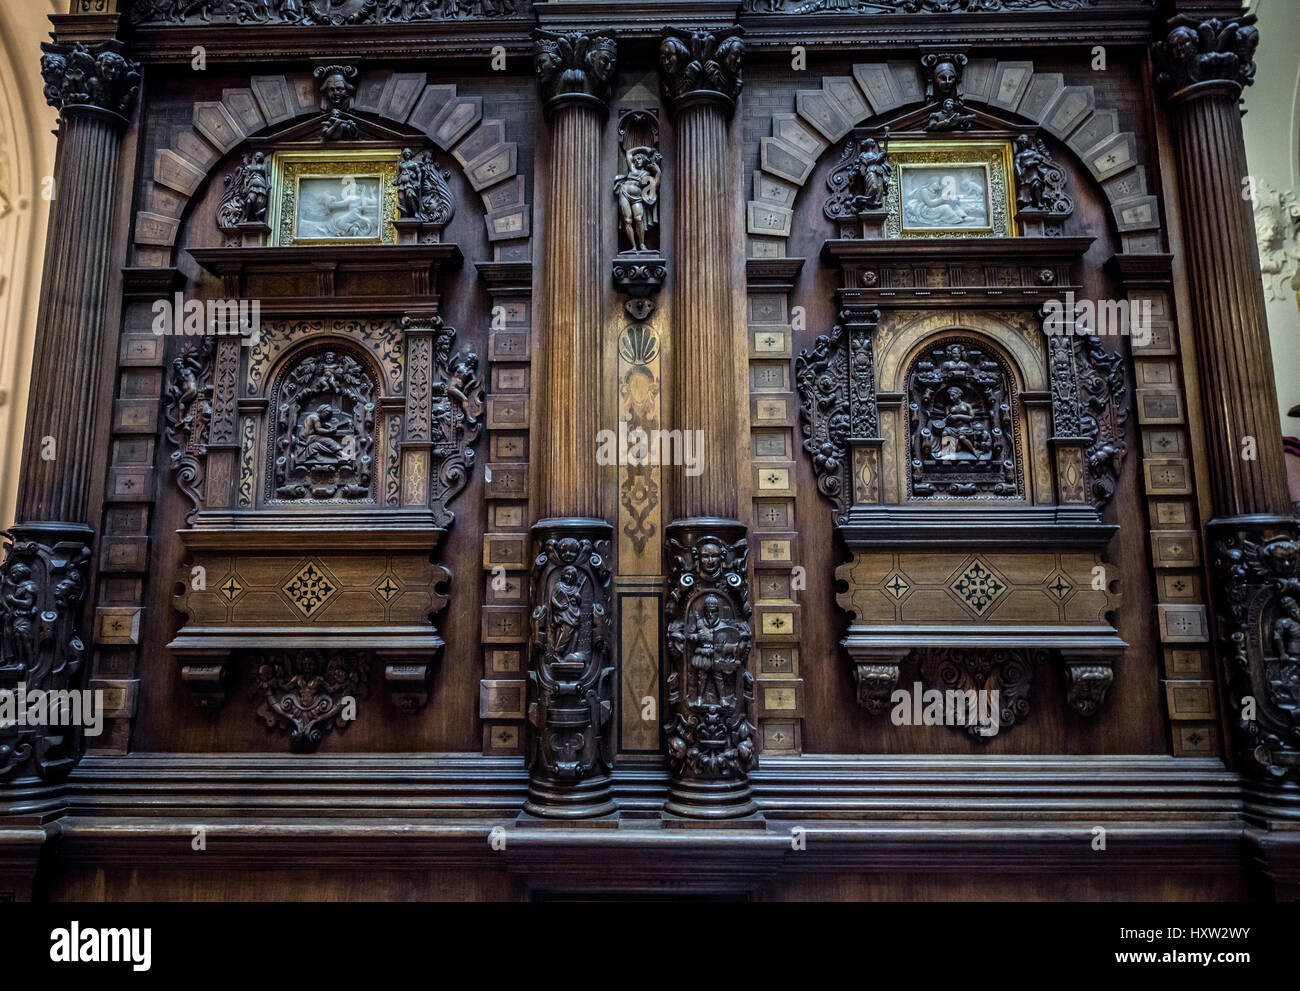 Woodwork in Hall of Honour (Holul de Onoare) in Peles Palace, former royal castle, built between 1873 and 1914, located near Sinaia city in Romania Stock Photo